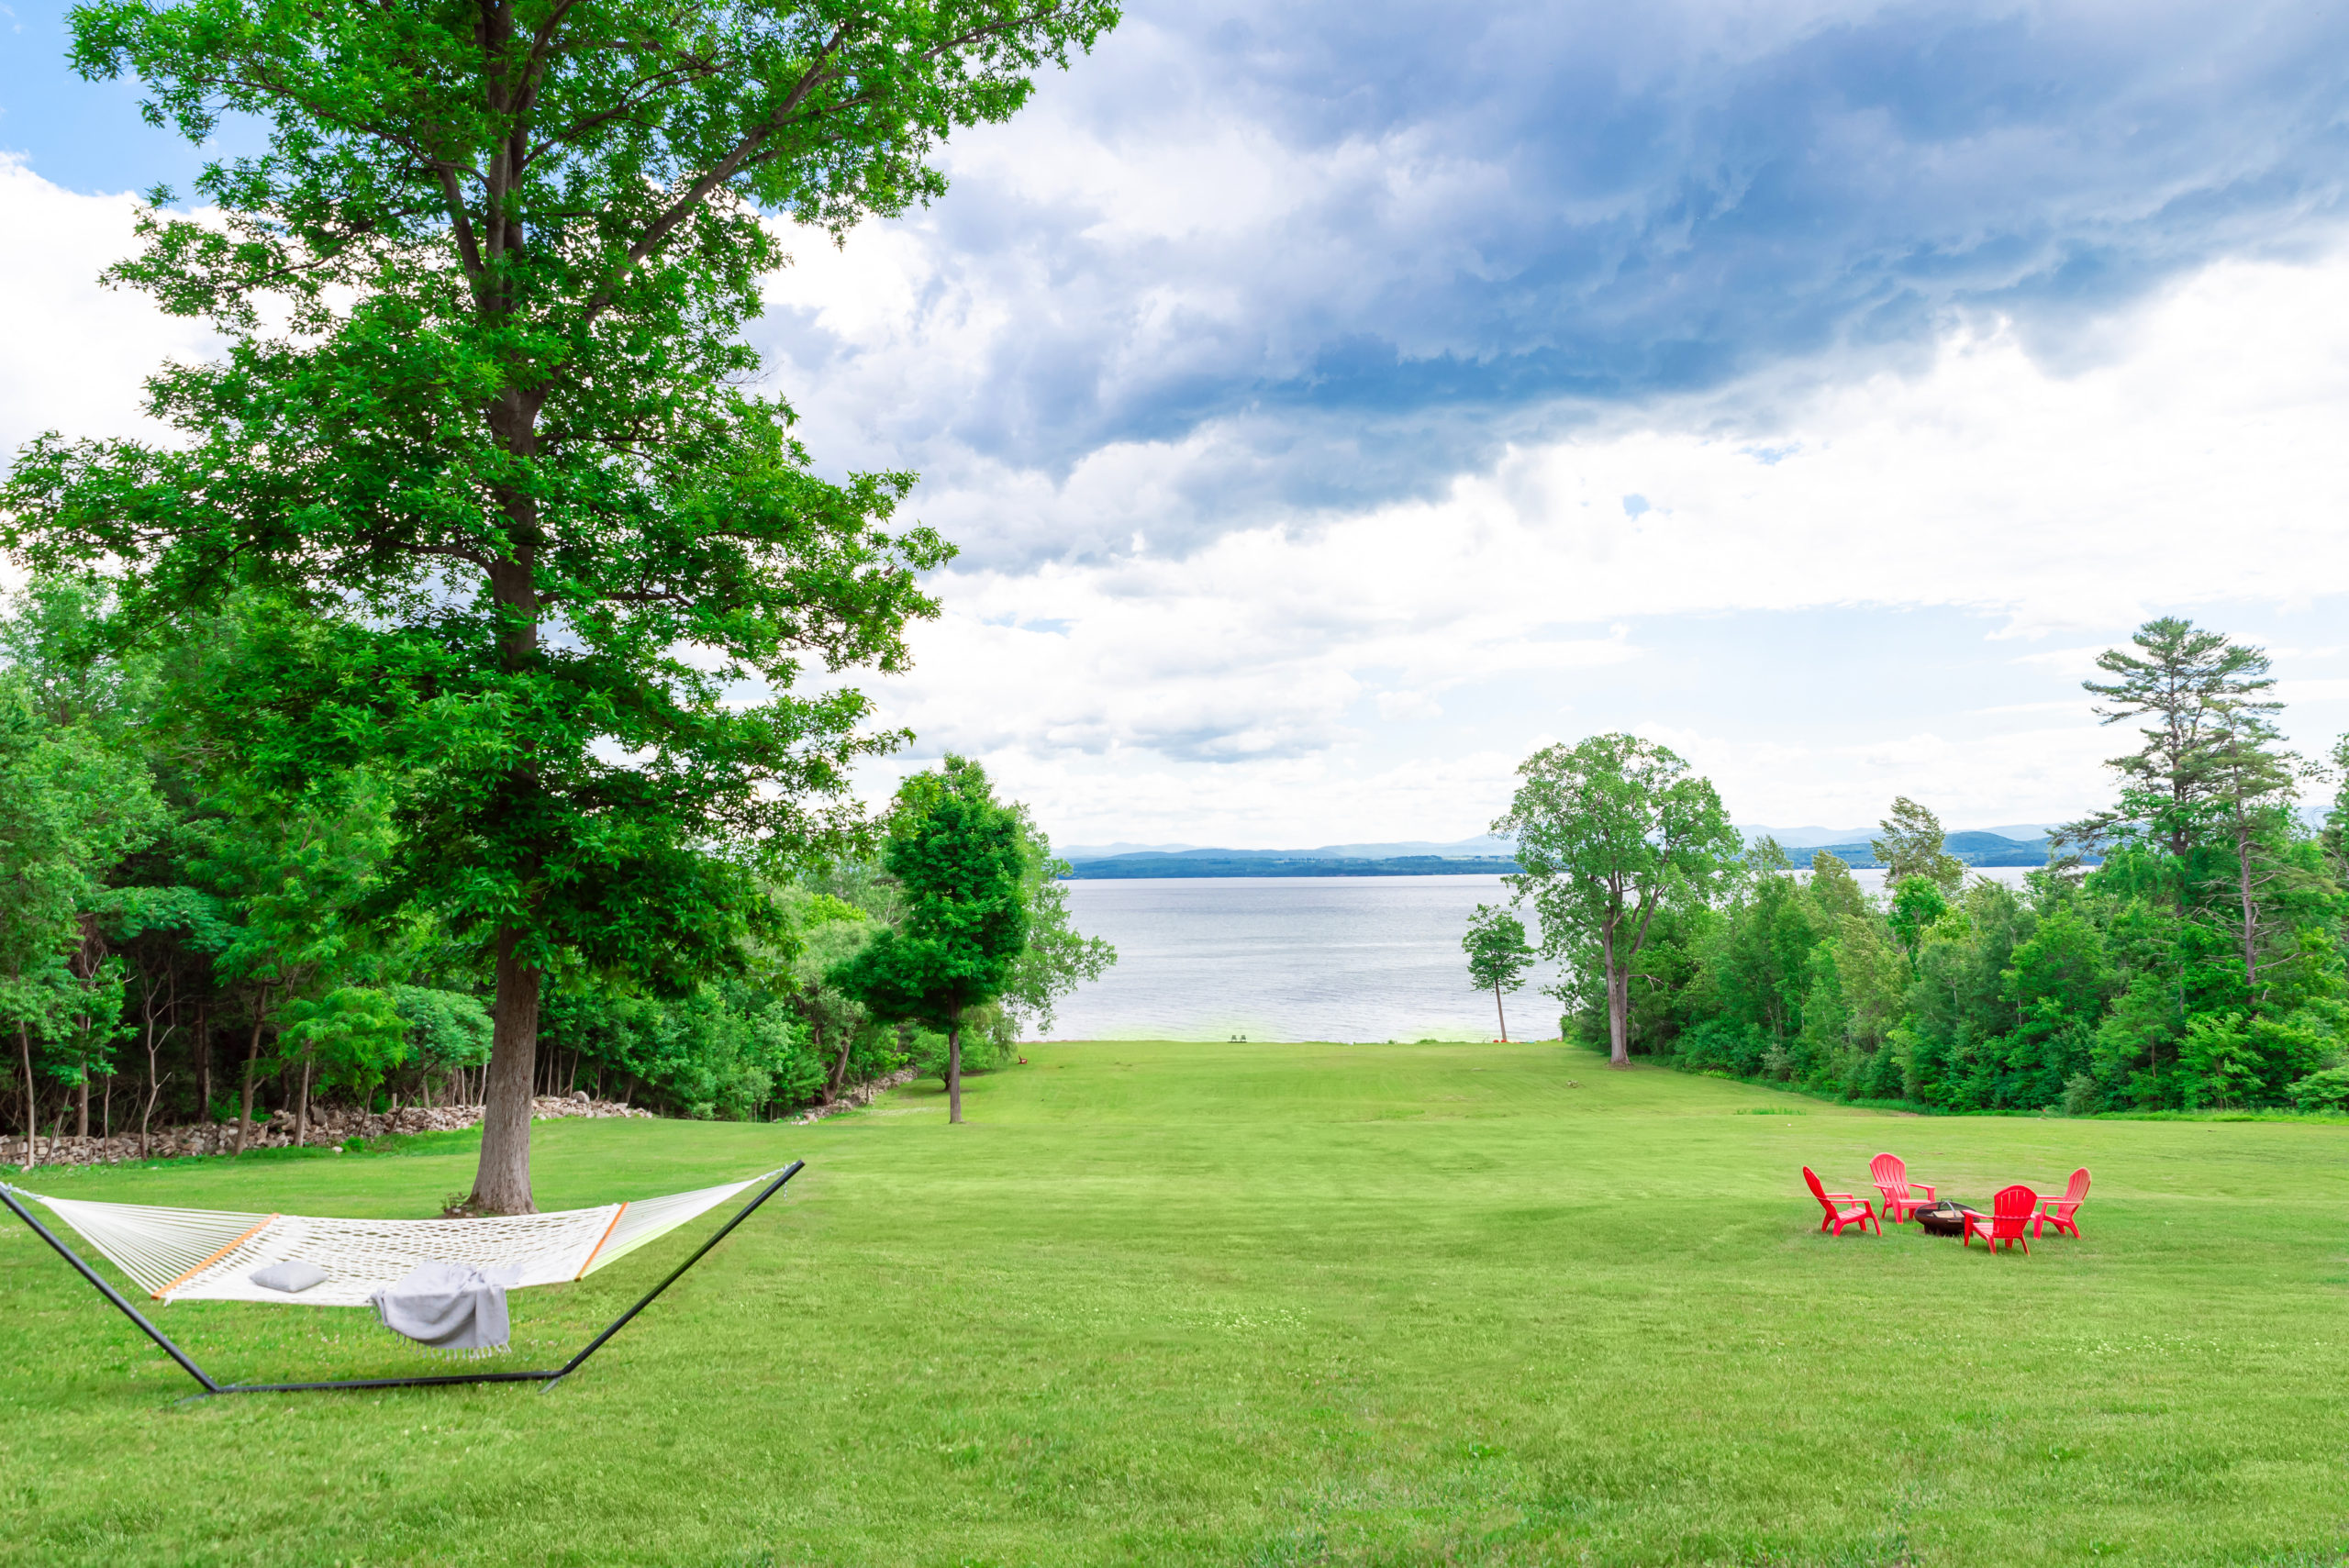 Paradise found! Lake Champlain (and Vermont’s Green Mountains) at the bottom of a long private lawn.